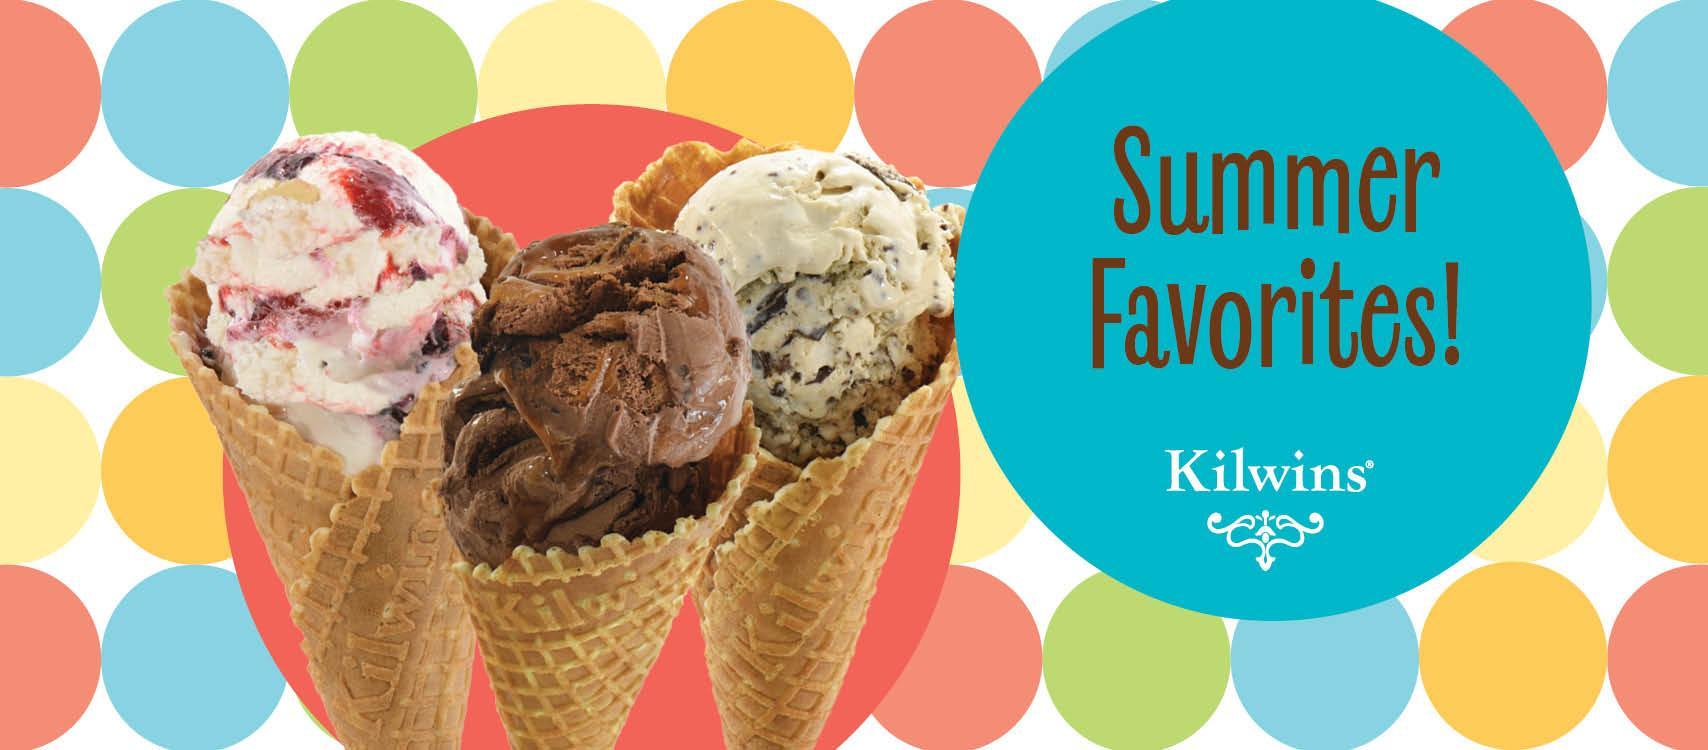 Kilwins Fort Collins Ice Cream, Chocolates, Fudge, Caramel Apples and Confections